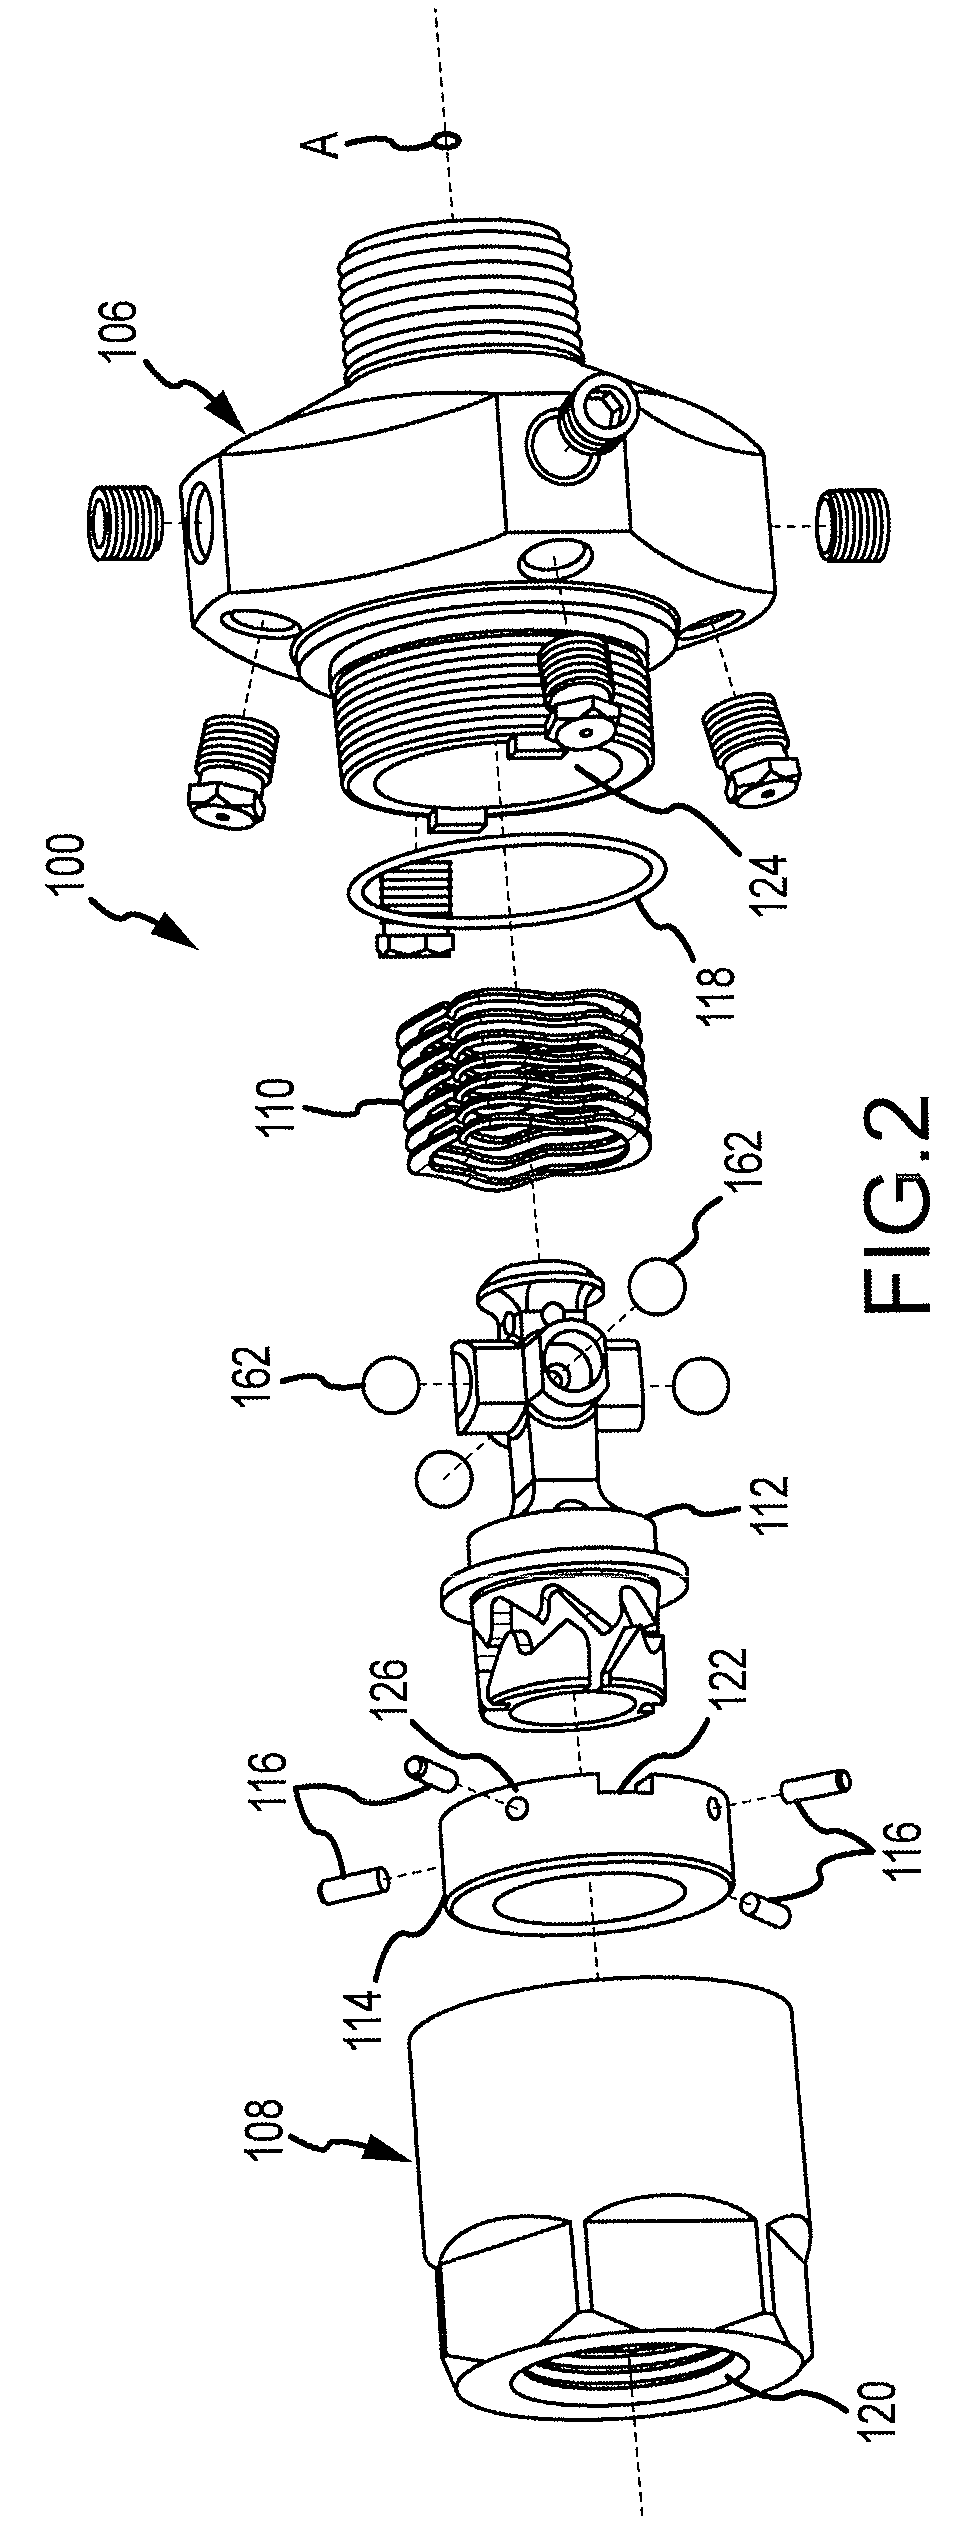 Flow controlled switching valve